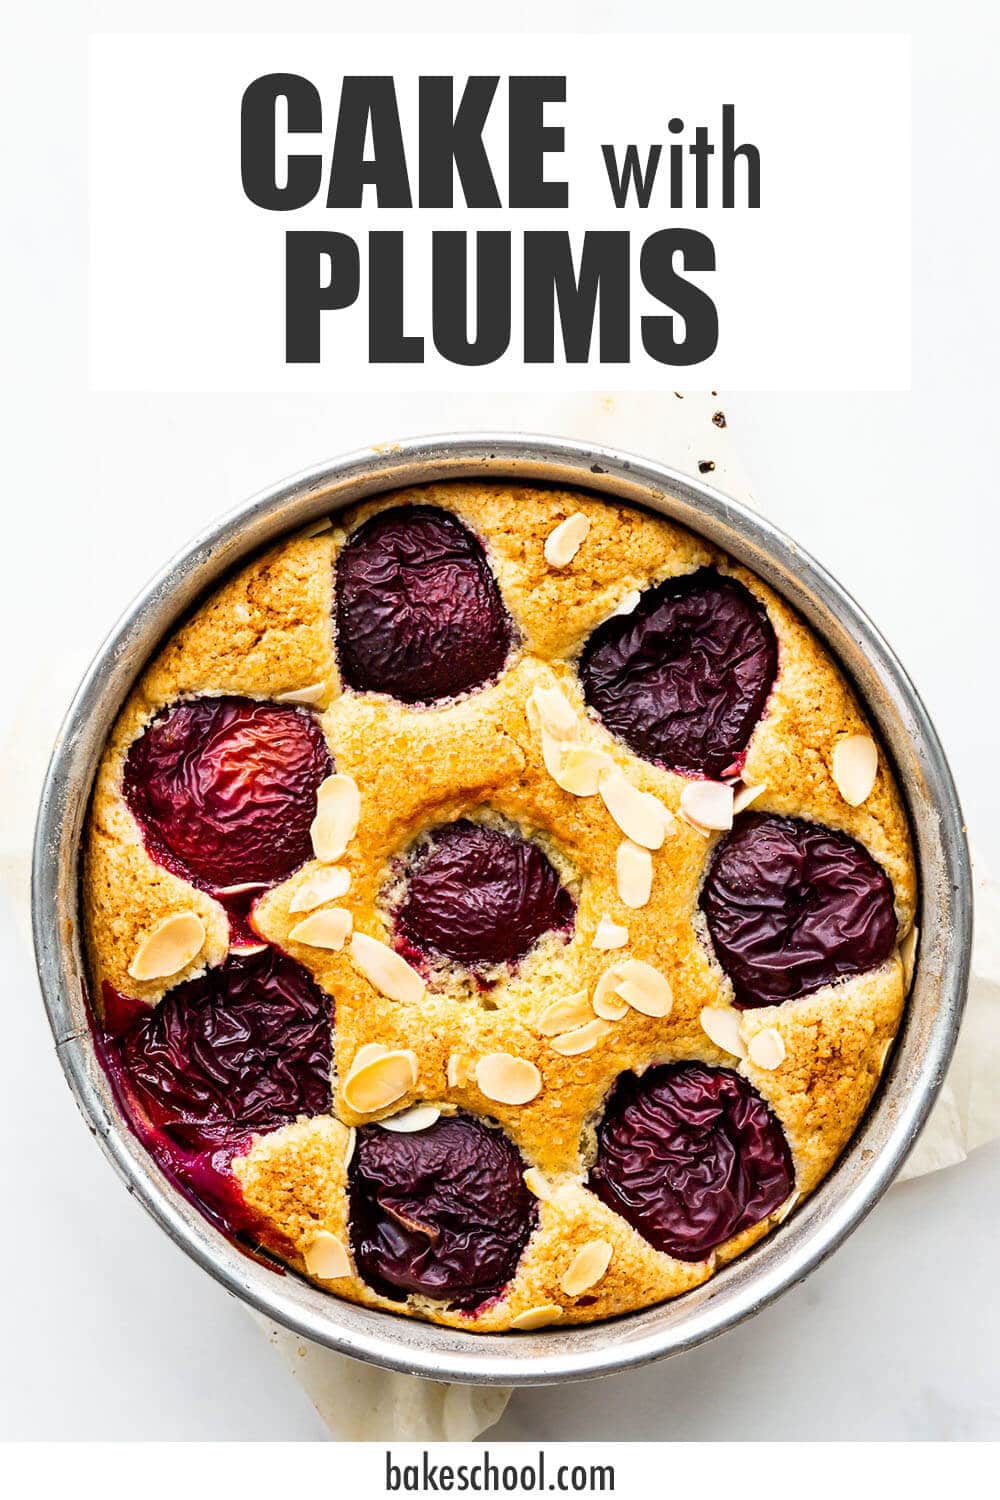 Cake with plums and sliced almonds, baked in a springform pan.